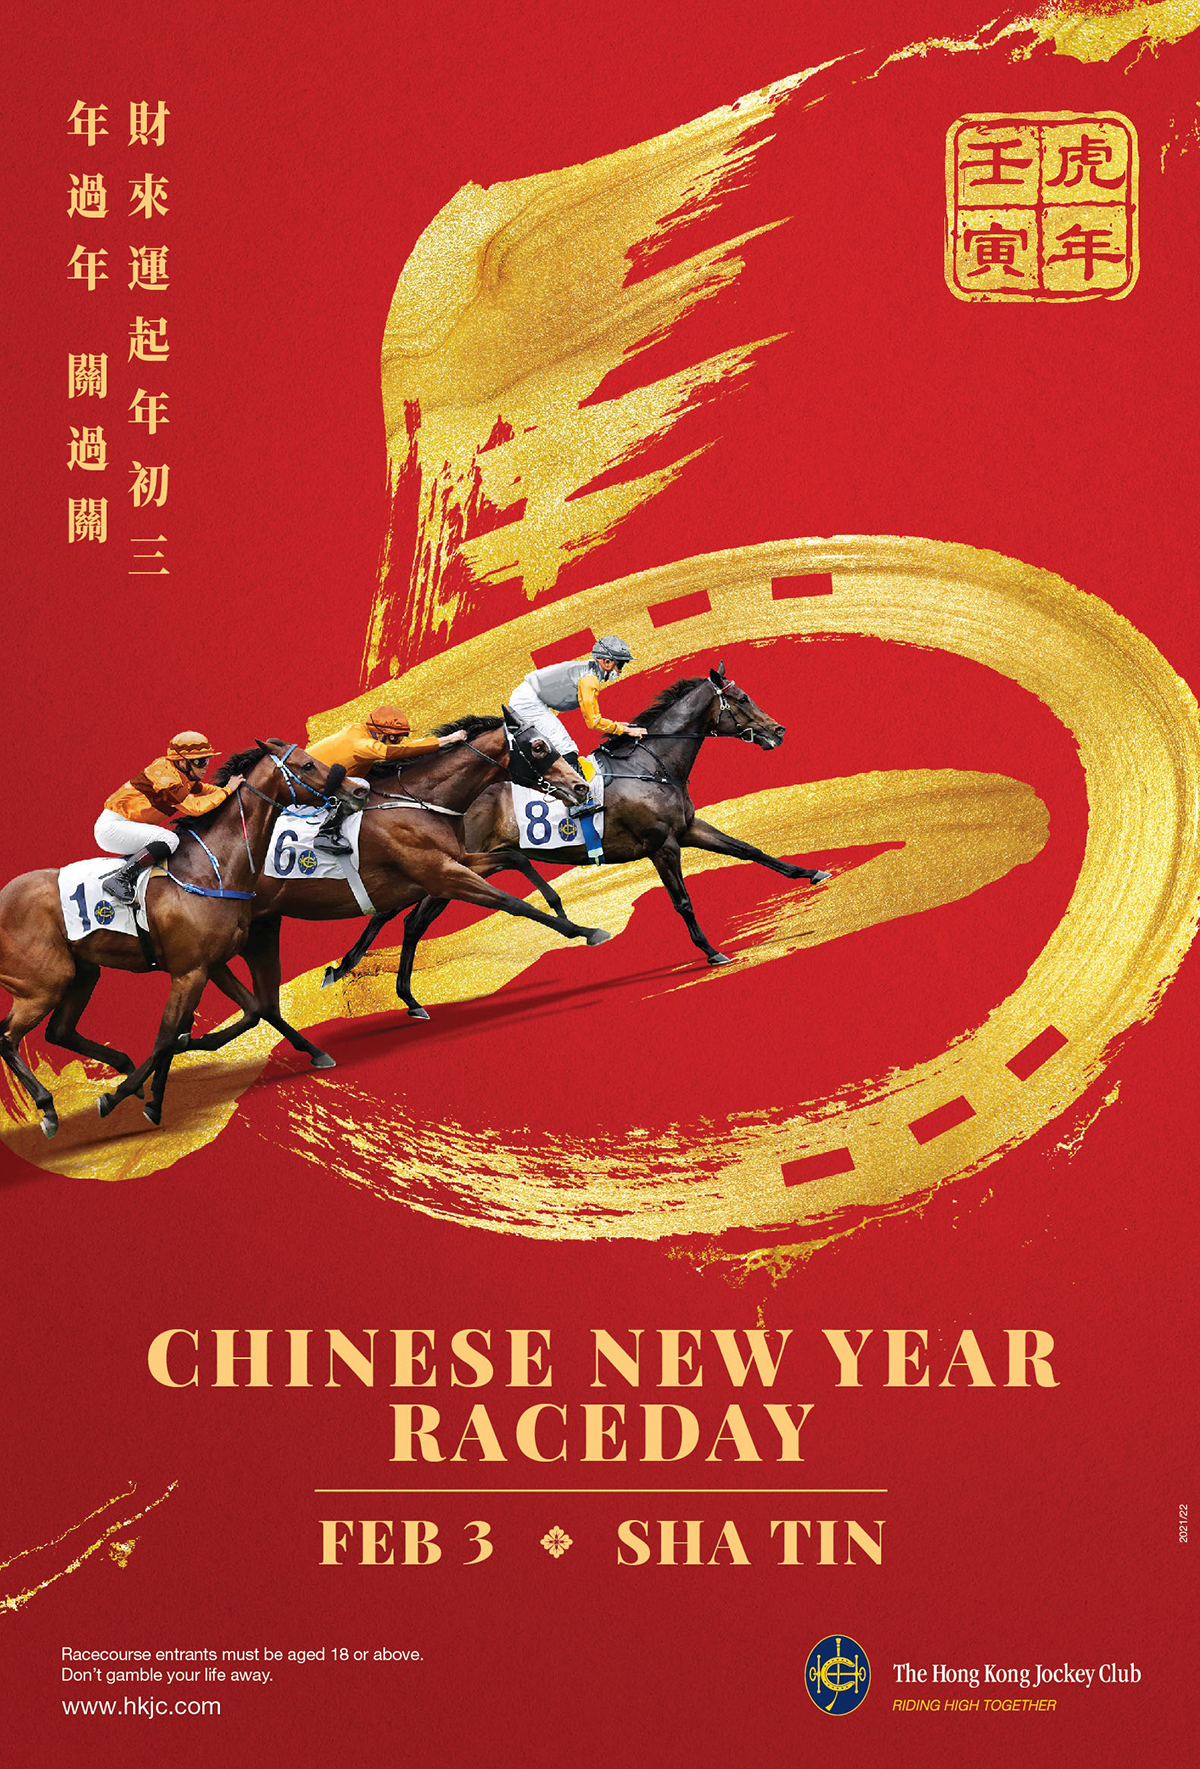 The Chinese New Year Raceday